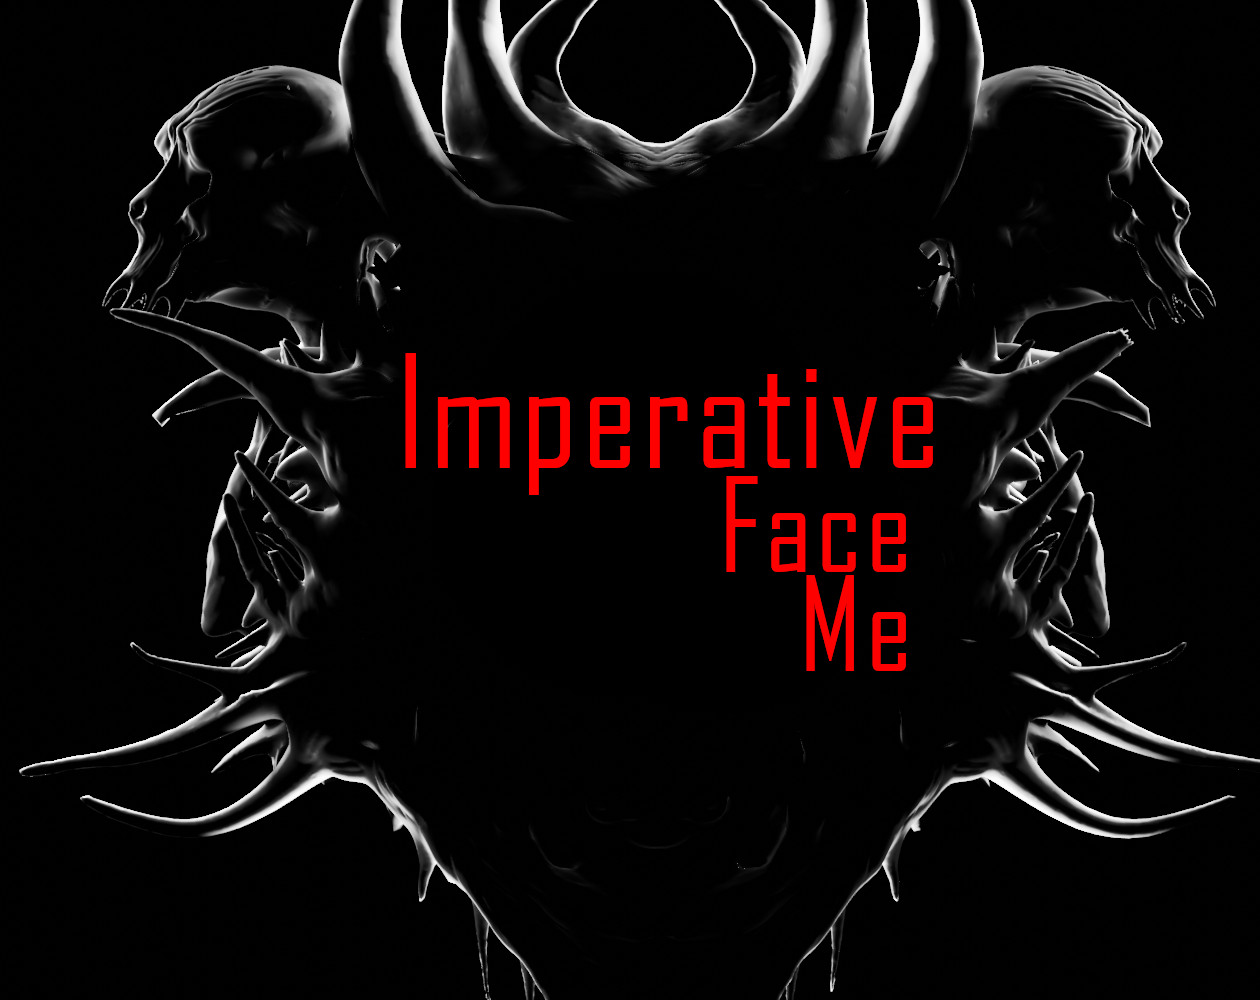 Imperative Face Me